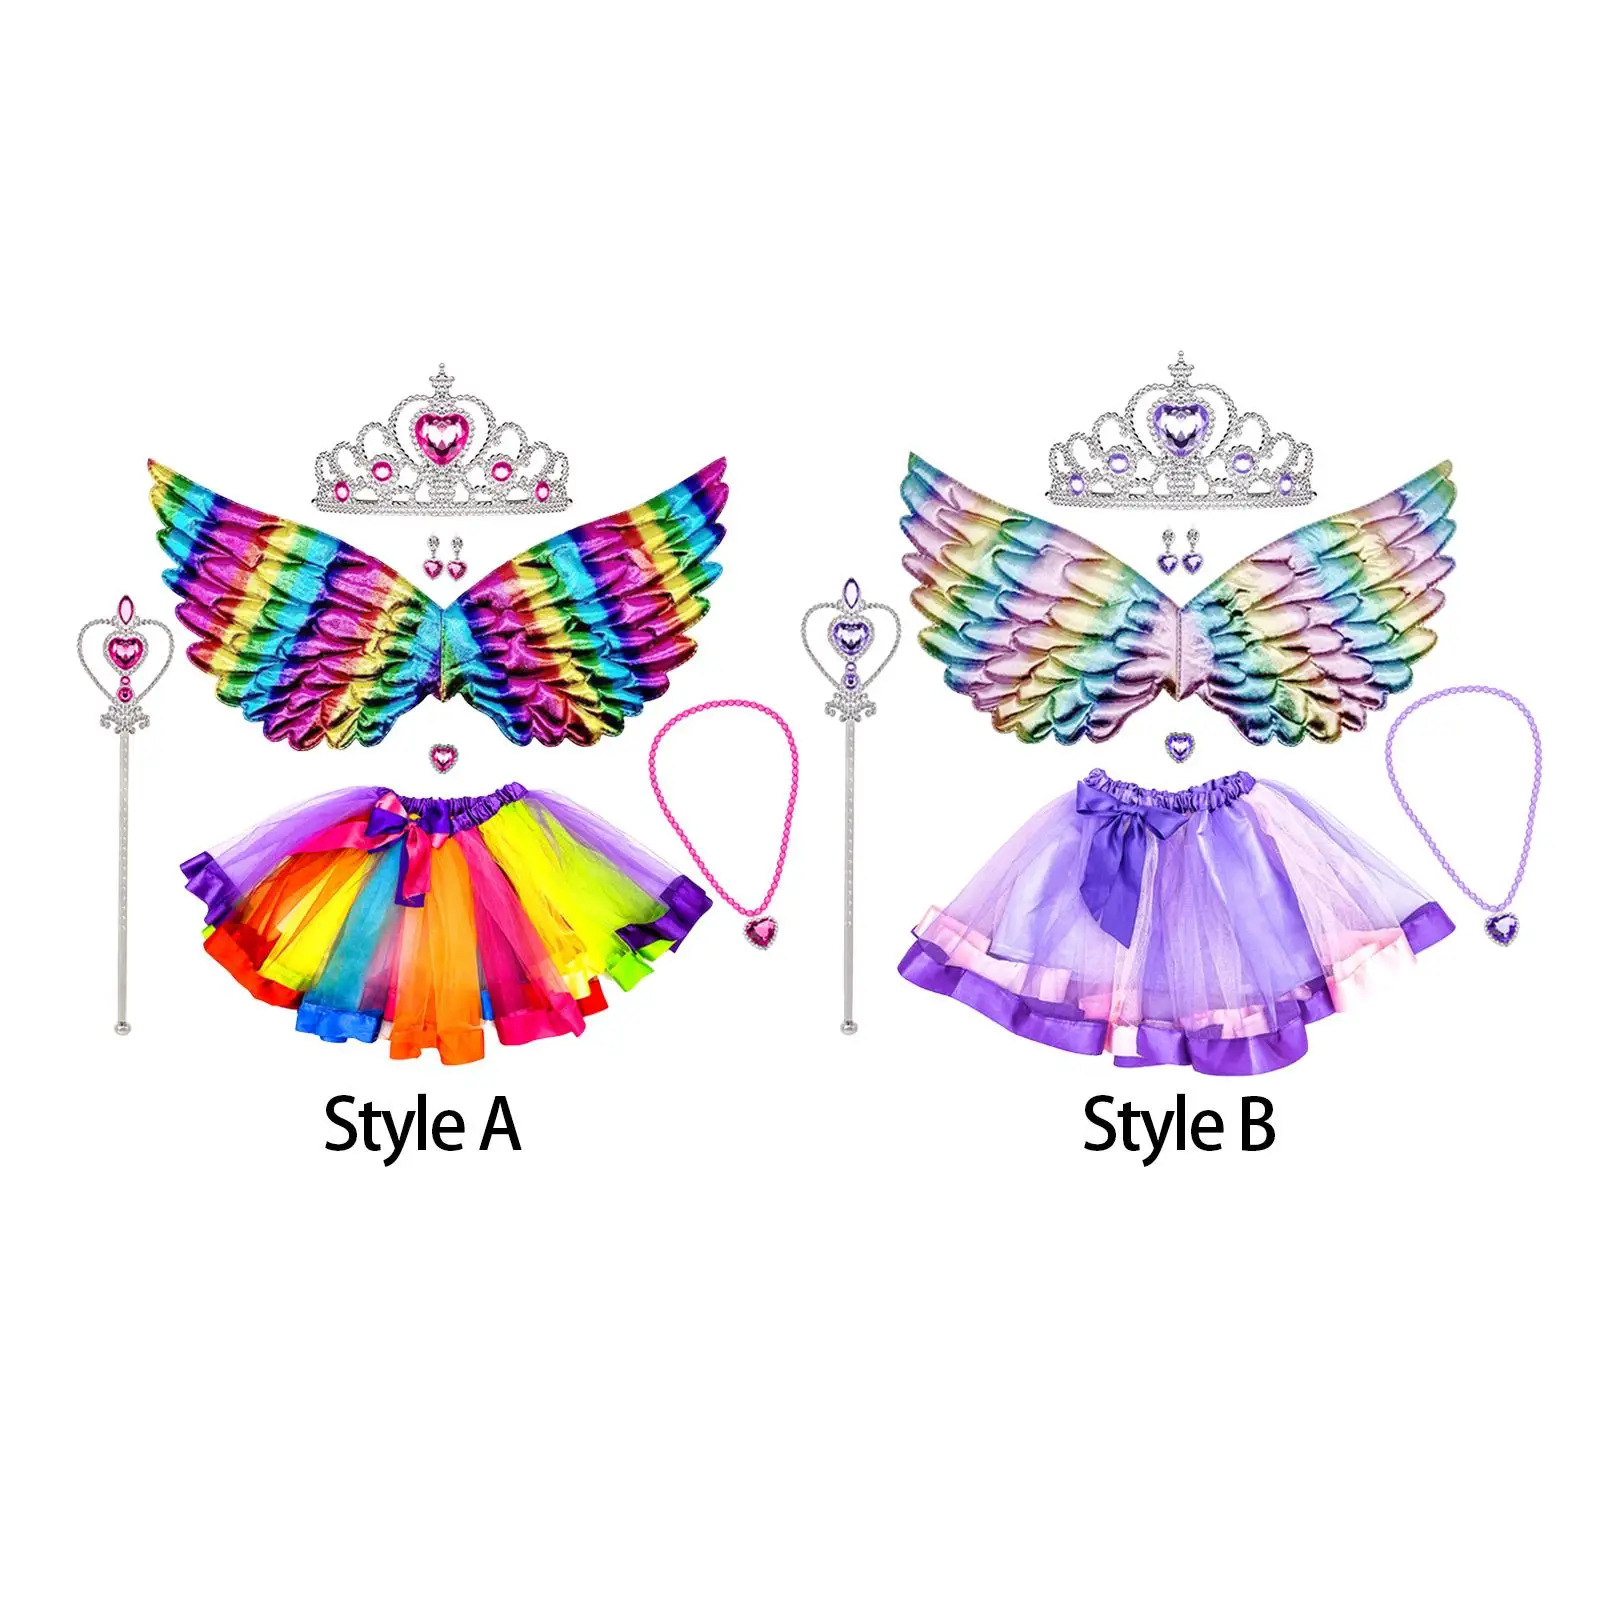 Fairy Costumes for Girls Cosplay Child Dress up Princess Tutu Skirts for Halloween Carnivals Nightclub Festival Masquerade